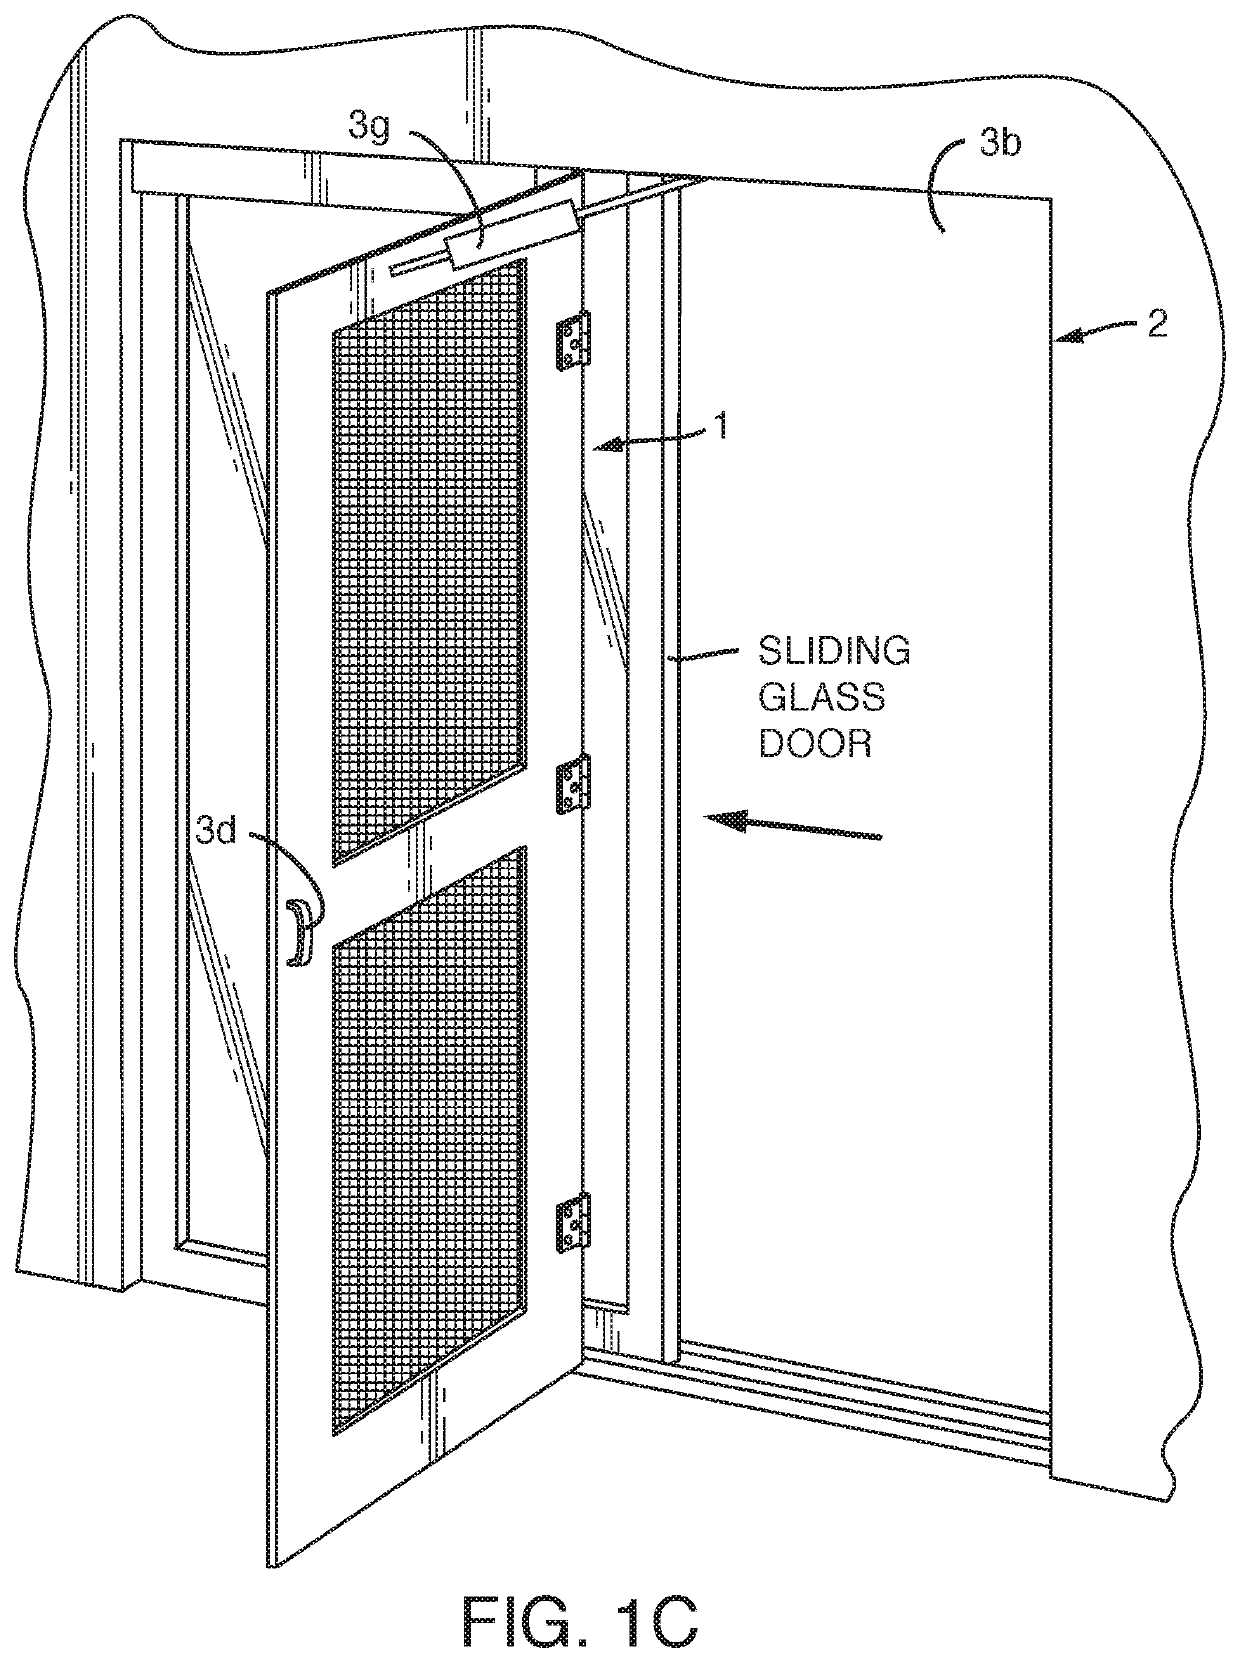 Screen door kit for patio sliding glass doors that swing out